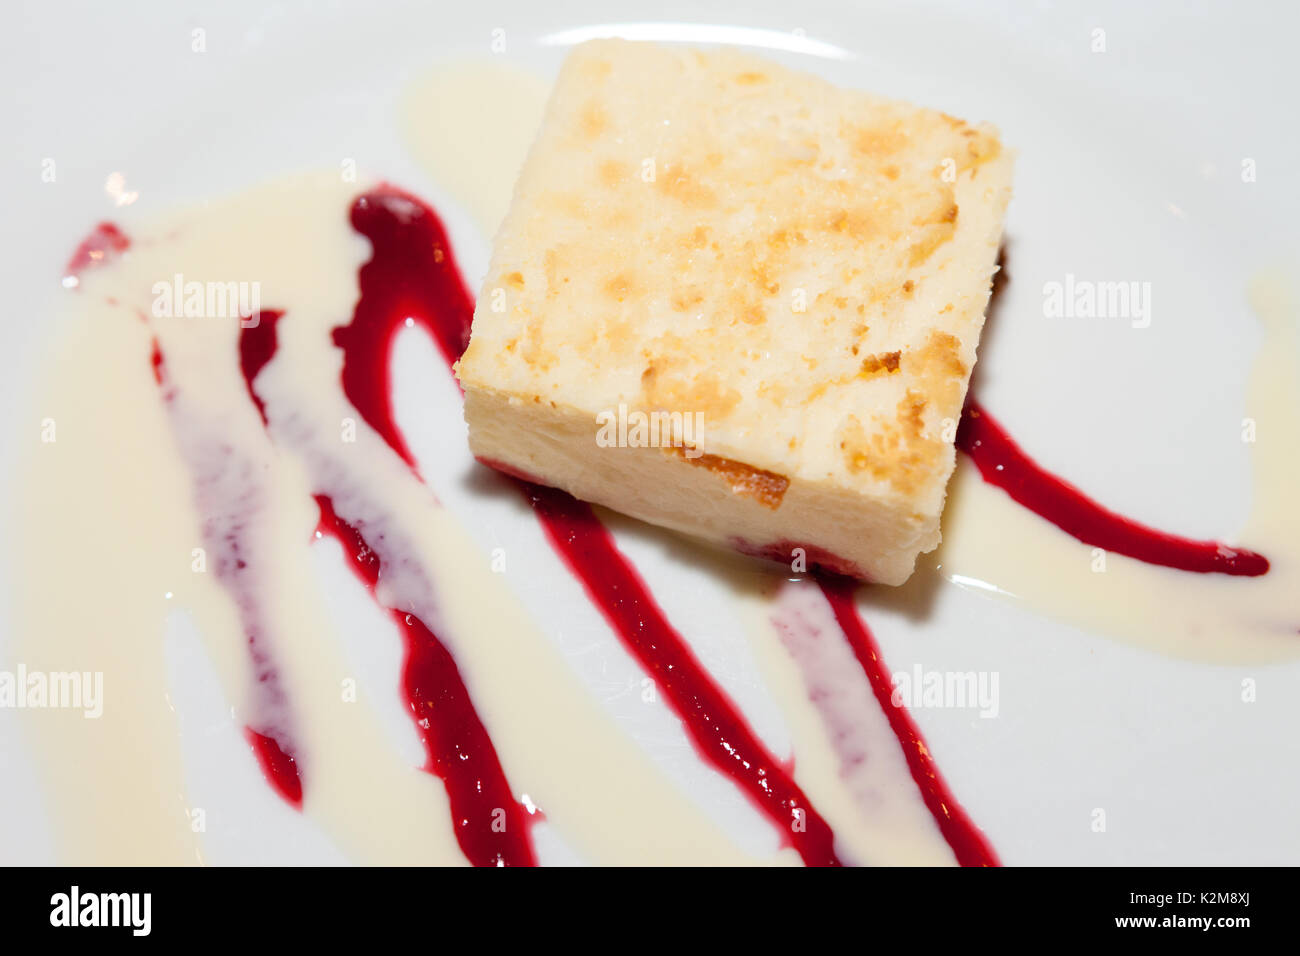 Cheese cake with syrup Stock Photo